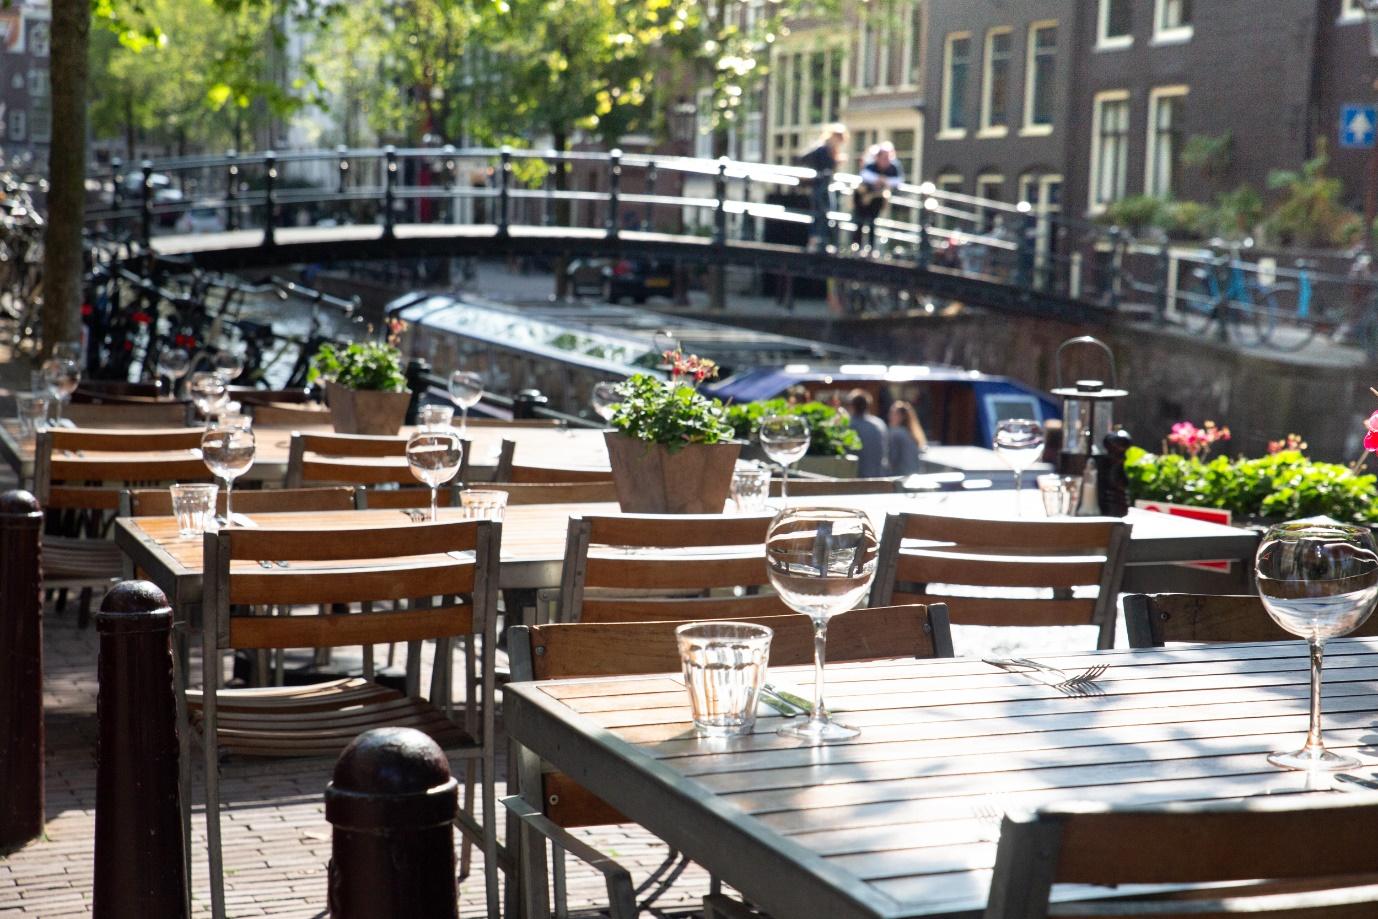 Amsterdam restaurant cafe tables set for outdoor dining with glassware and view of canal bridge in the background